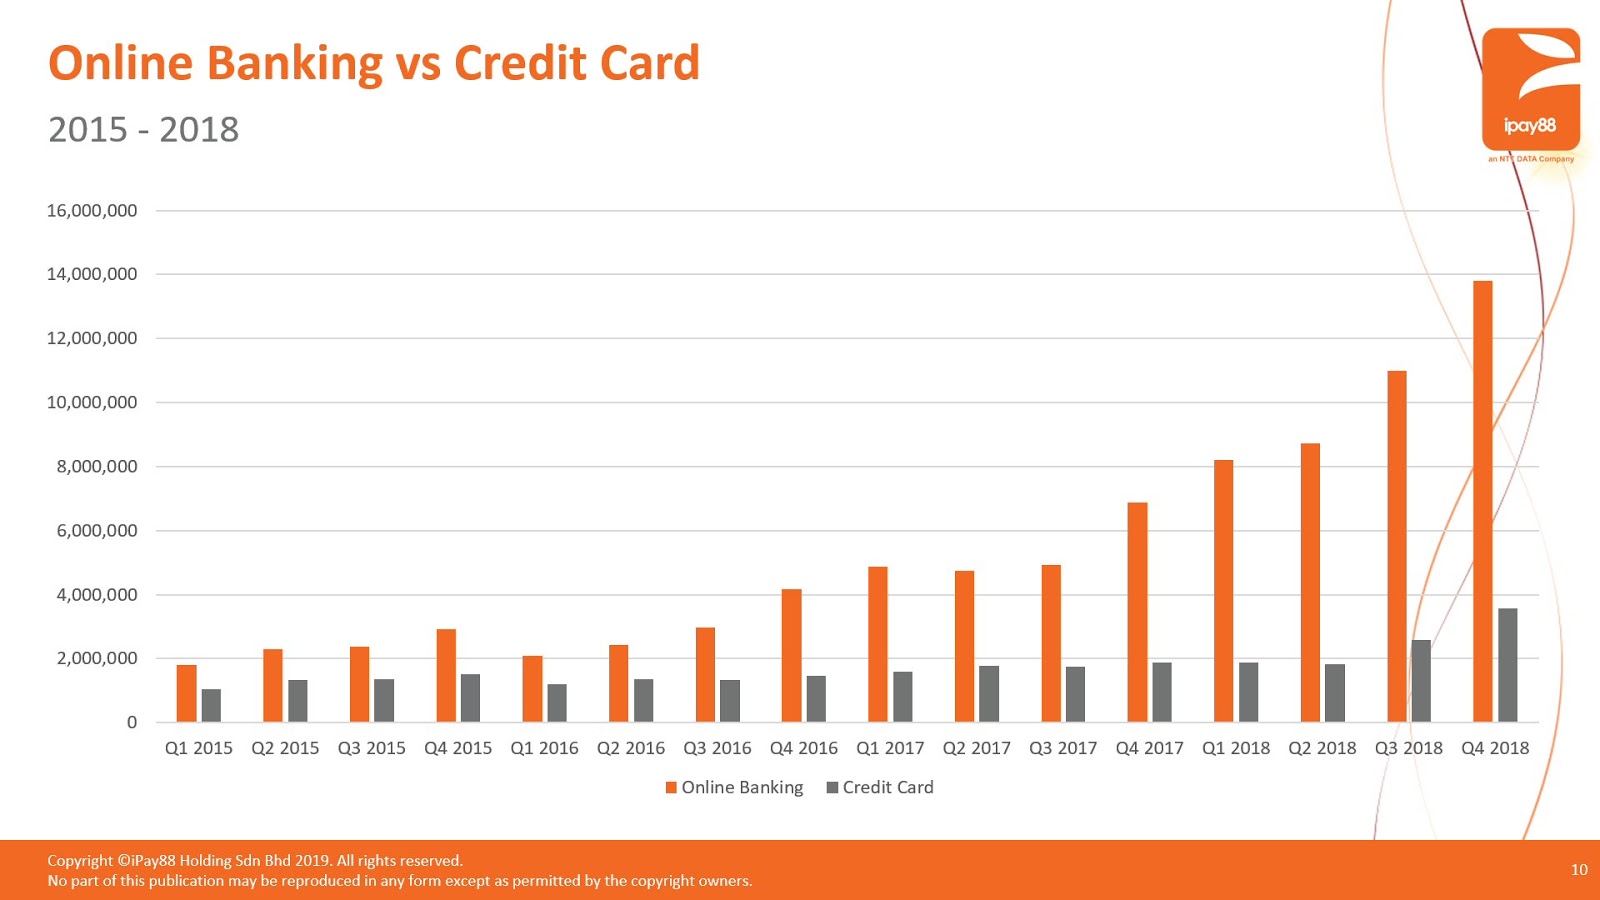 iPay88: Online Banking vs Credit Card from 2015 to 2018